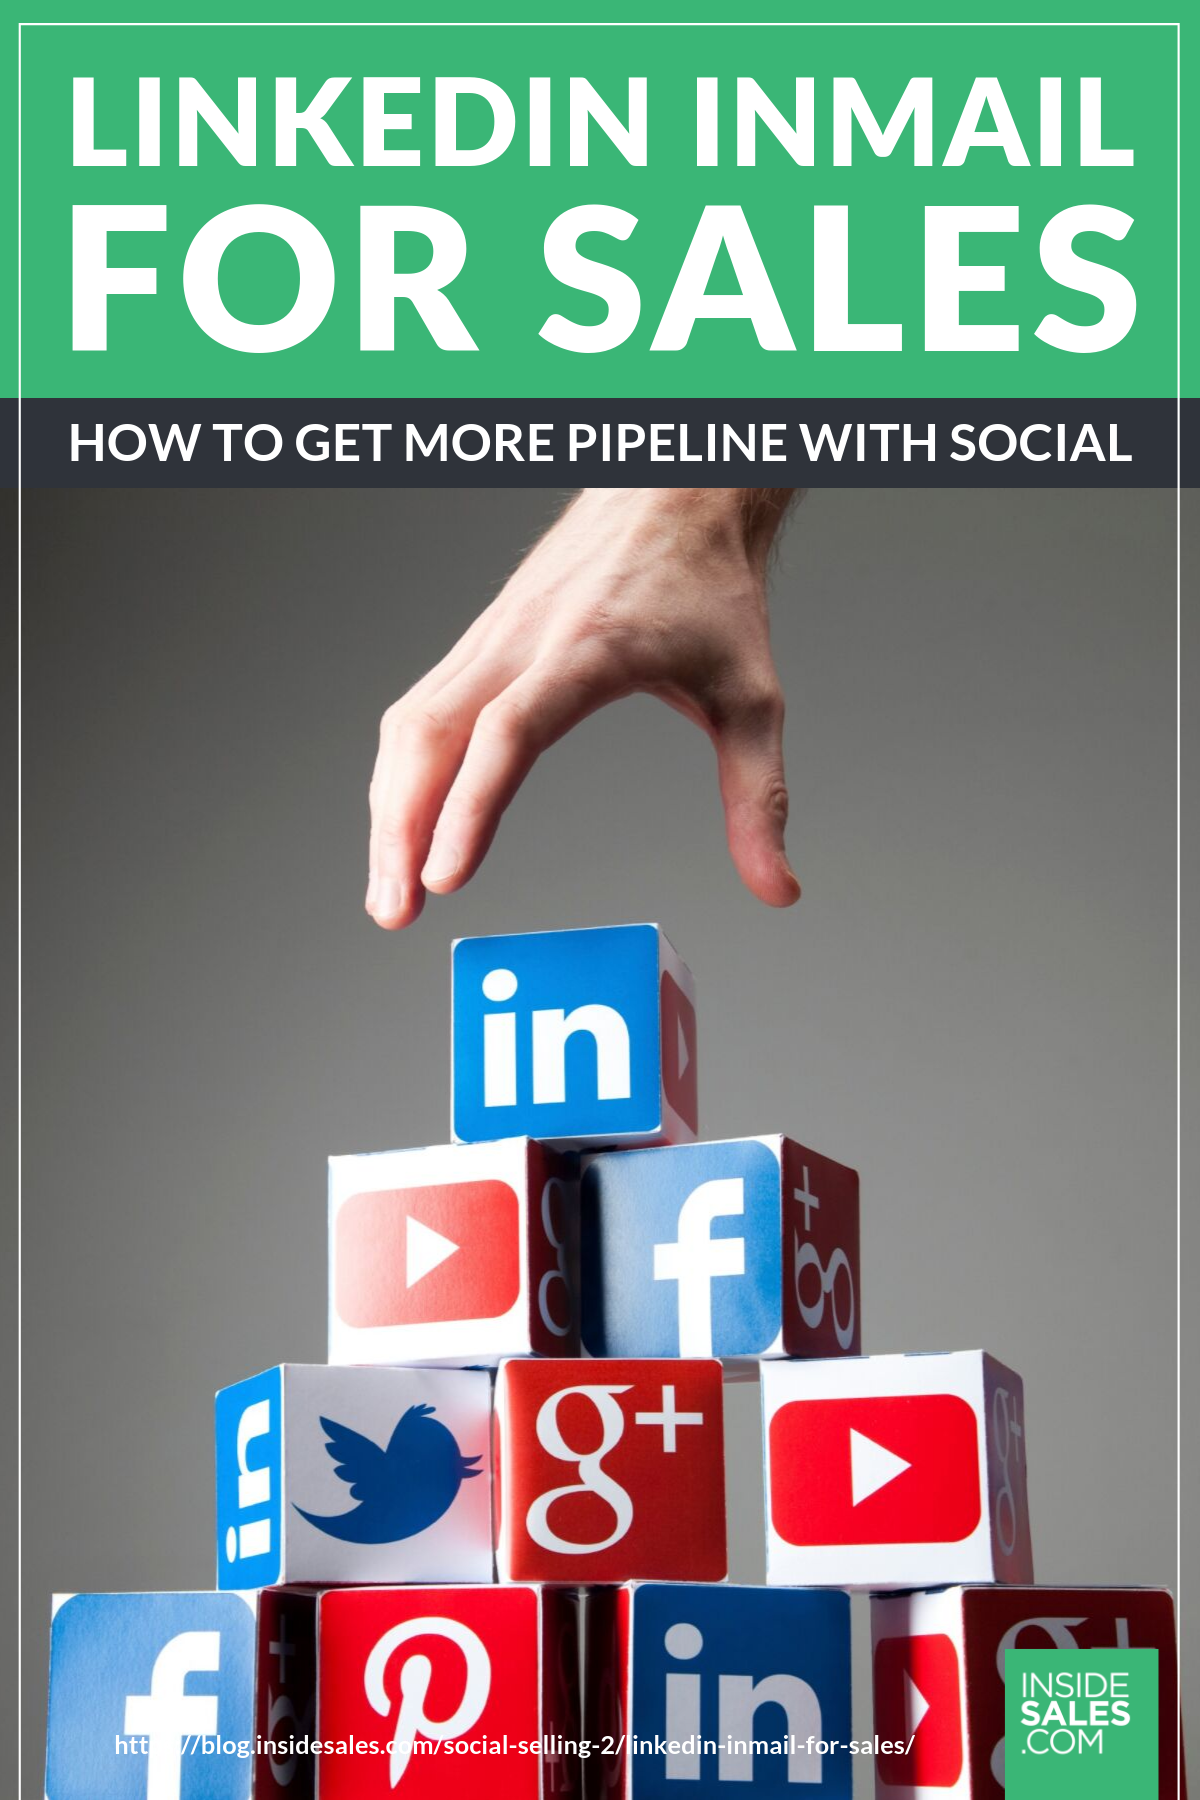 LinkedIn InMail For Sales — How To Get More Pipeline With Social https://resources.insidesales.com/blog/social-selling-2/linkedin-inmail-for-sales/